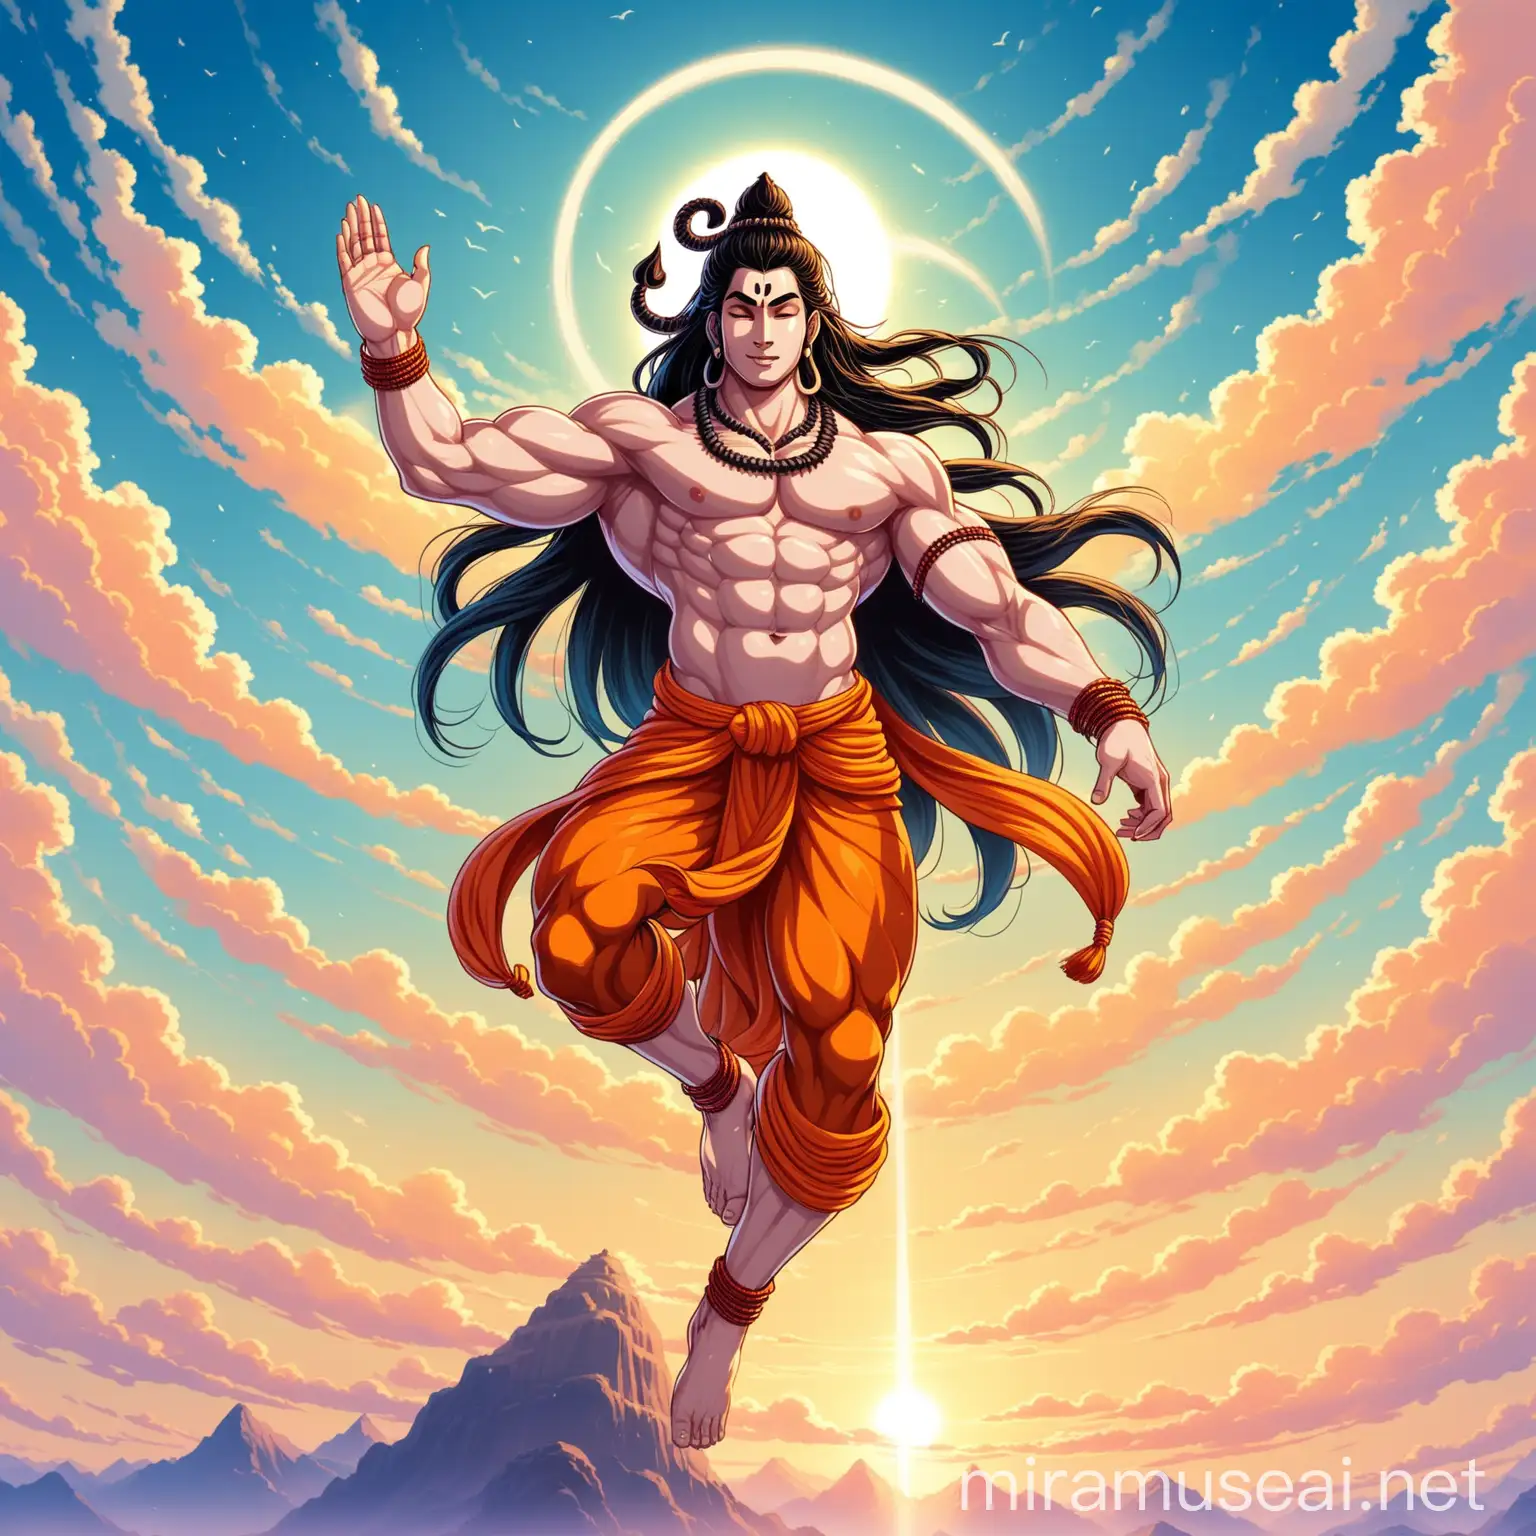 lord shiva ji fly in the air with muscler body
